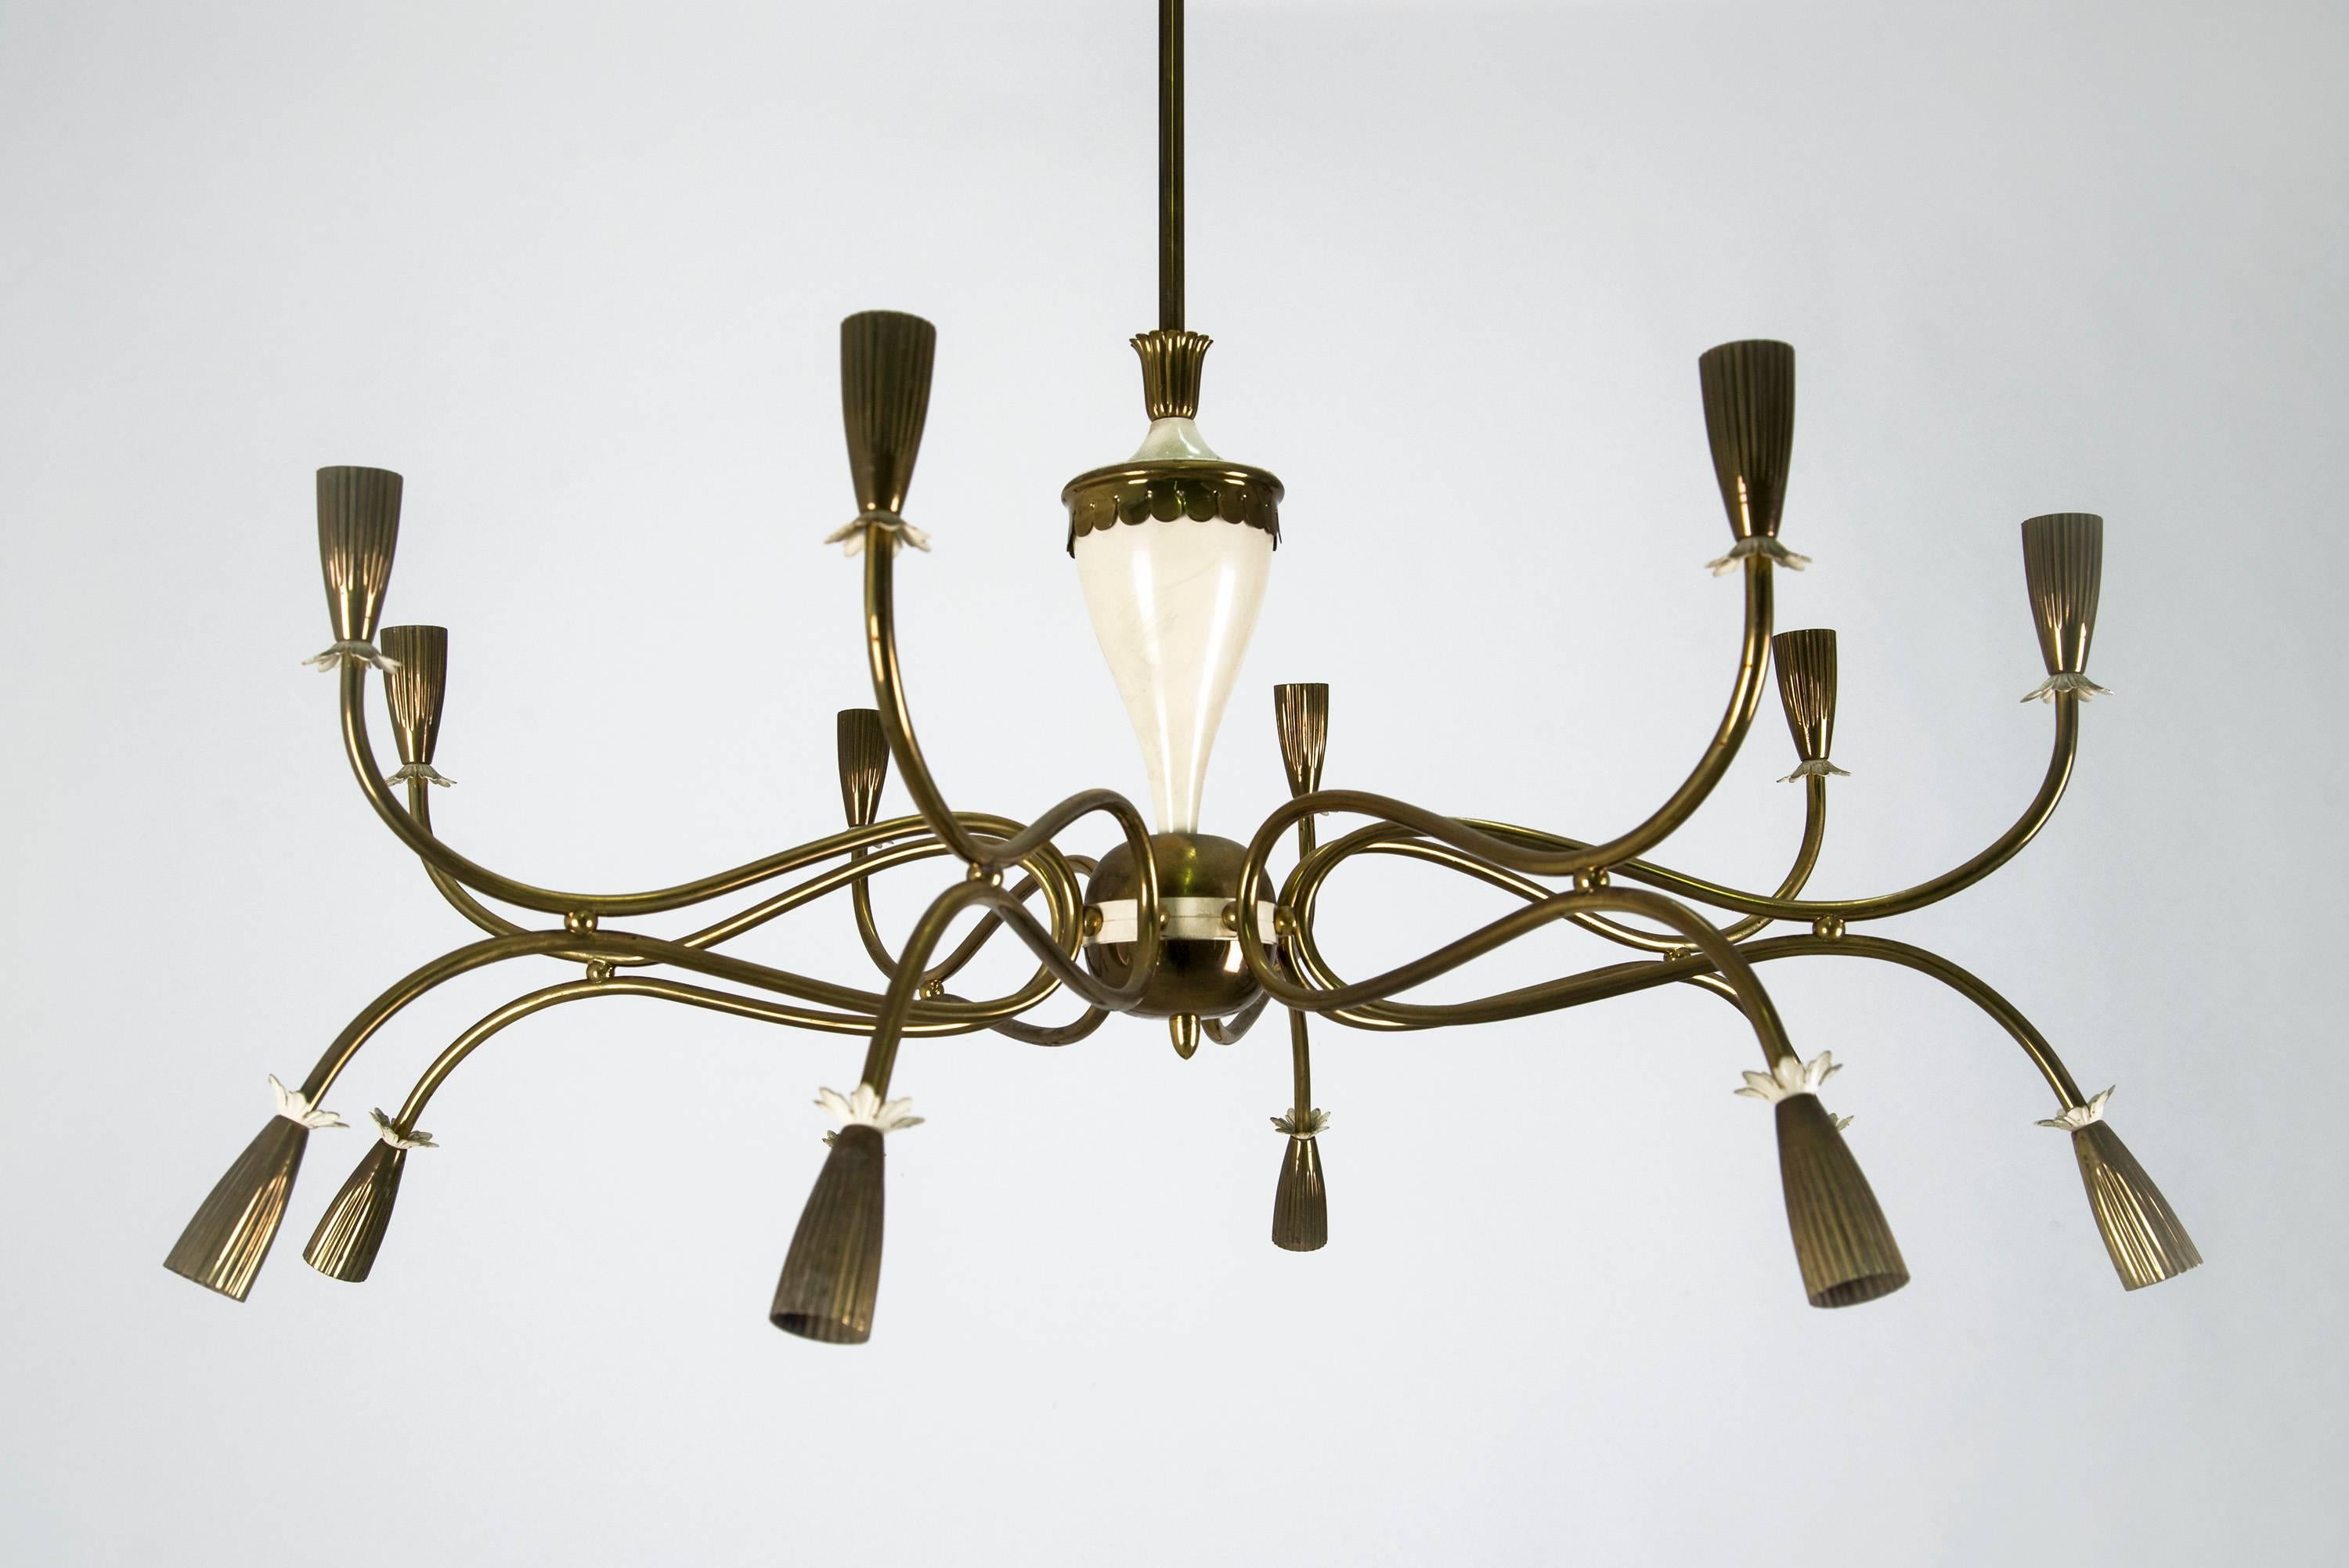 Large and elegant sixteen-light chandelier in the style of Paolo Buffa, manufactured in Italy in the 1950s. Brass and lacquered metal structure. Good original vintage conditions.